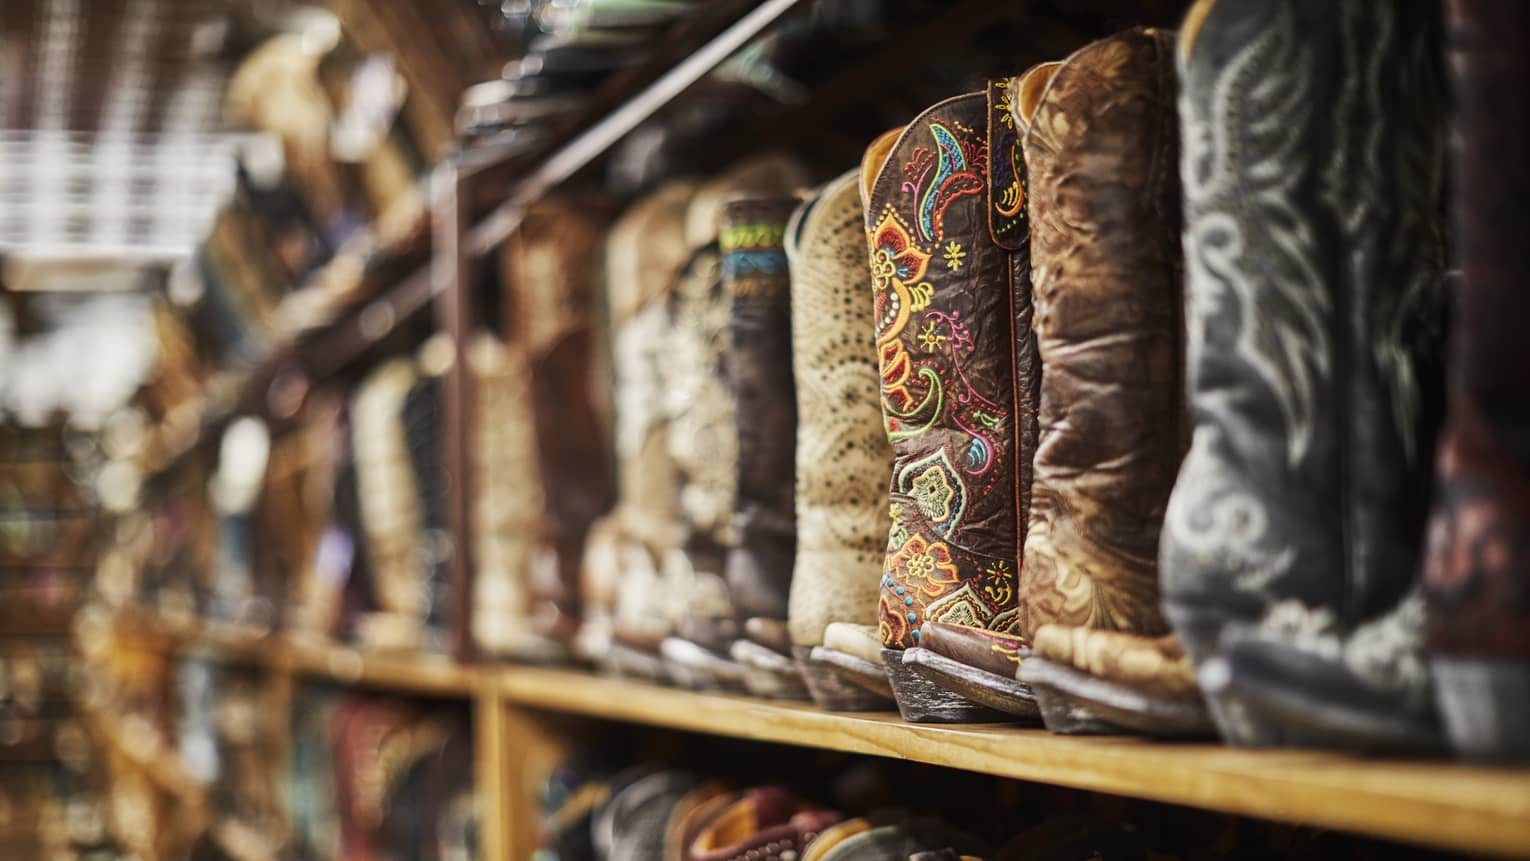 Shelves of cowboy boots of varying colours including black, brown and beige.